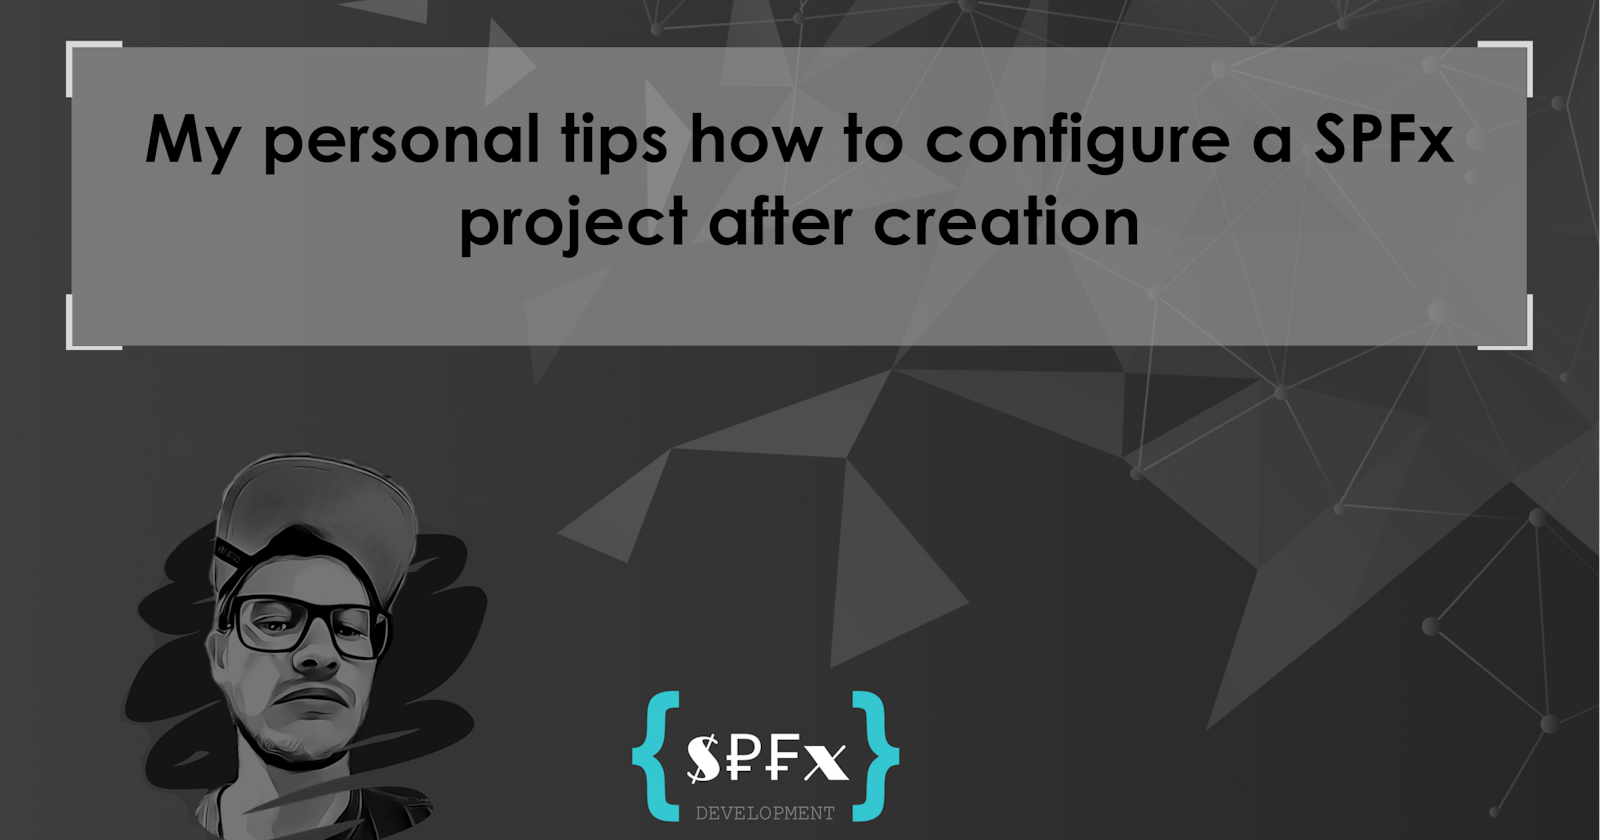 My personal tips how to configure a SPFx project after creation